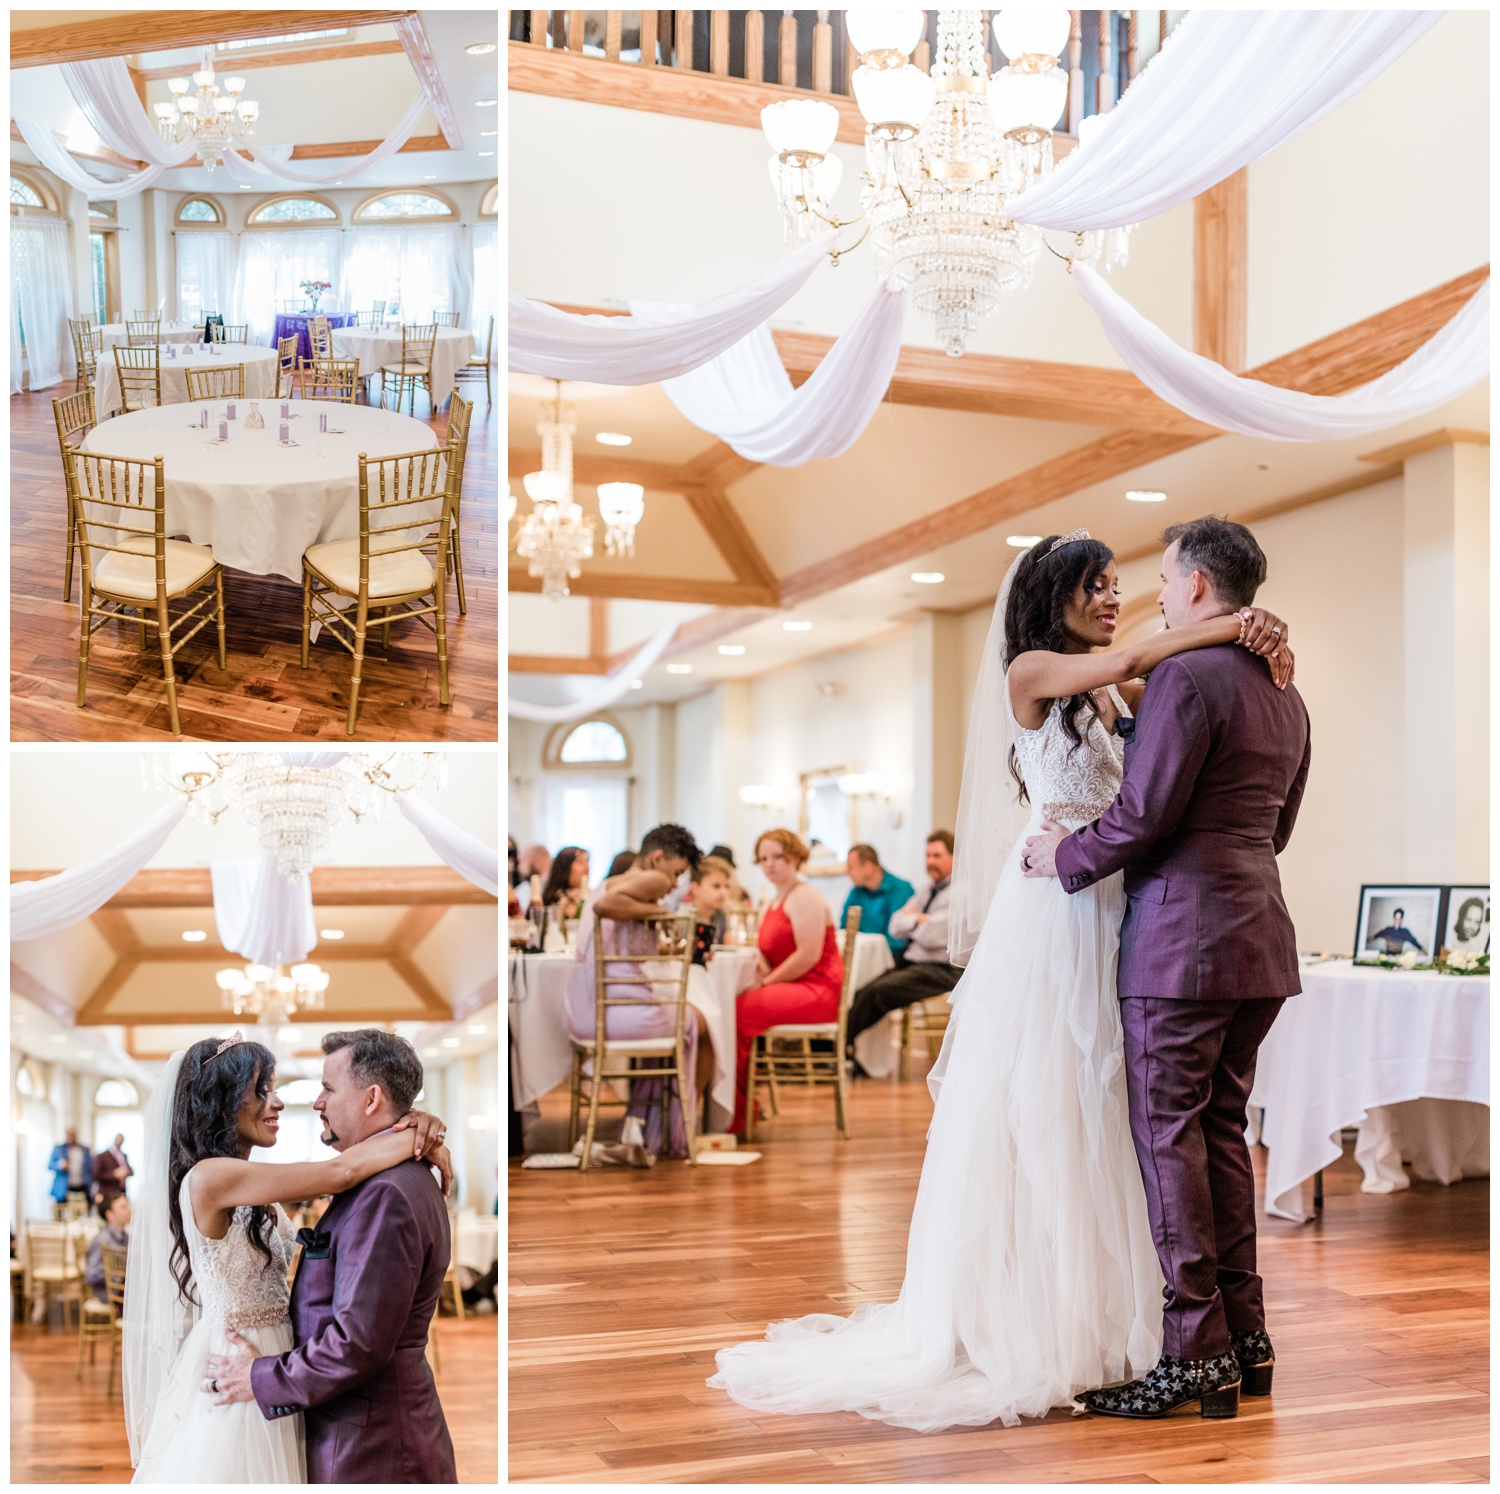 Reception and first dance - Savannah Elopement Package